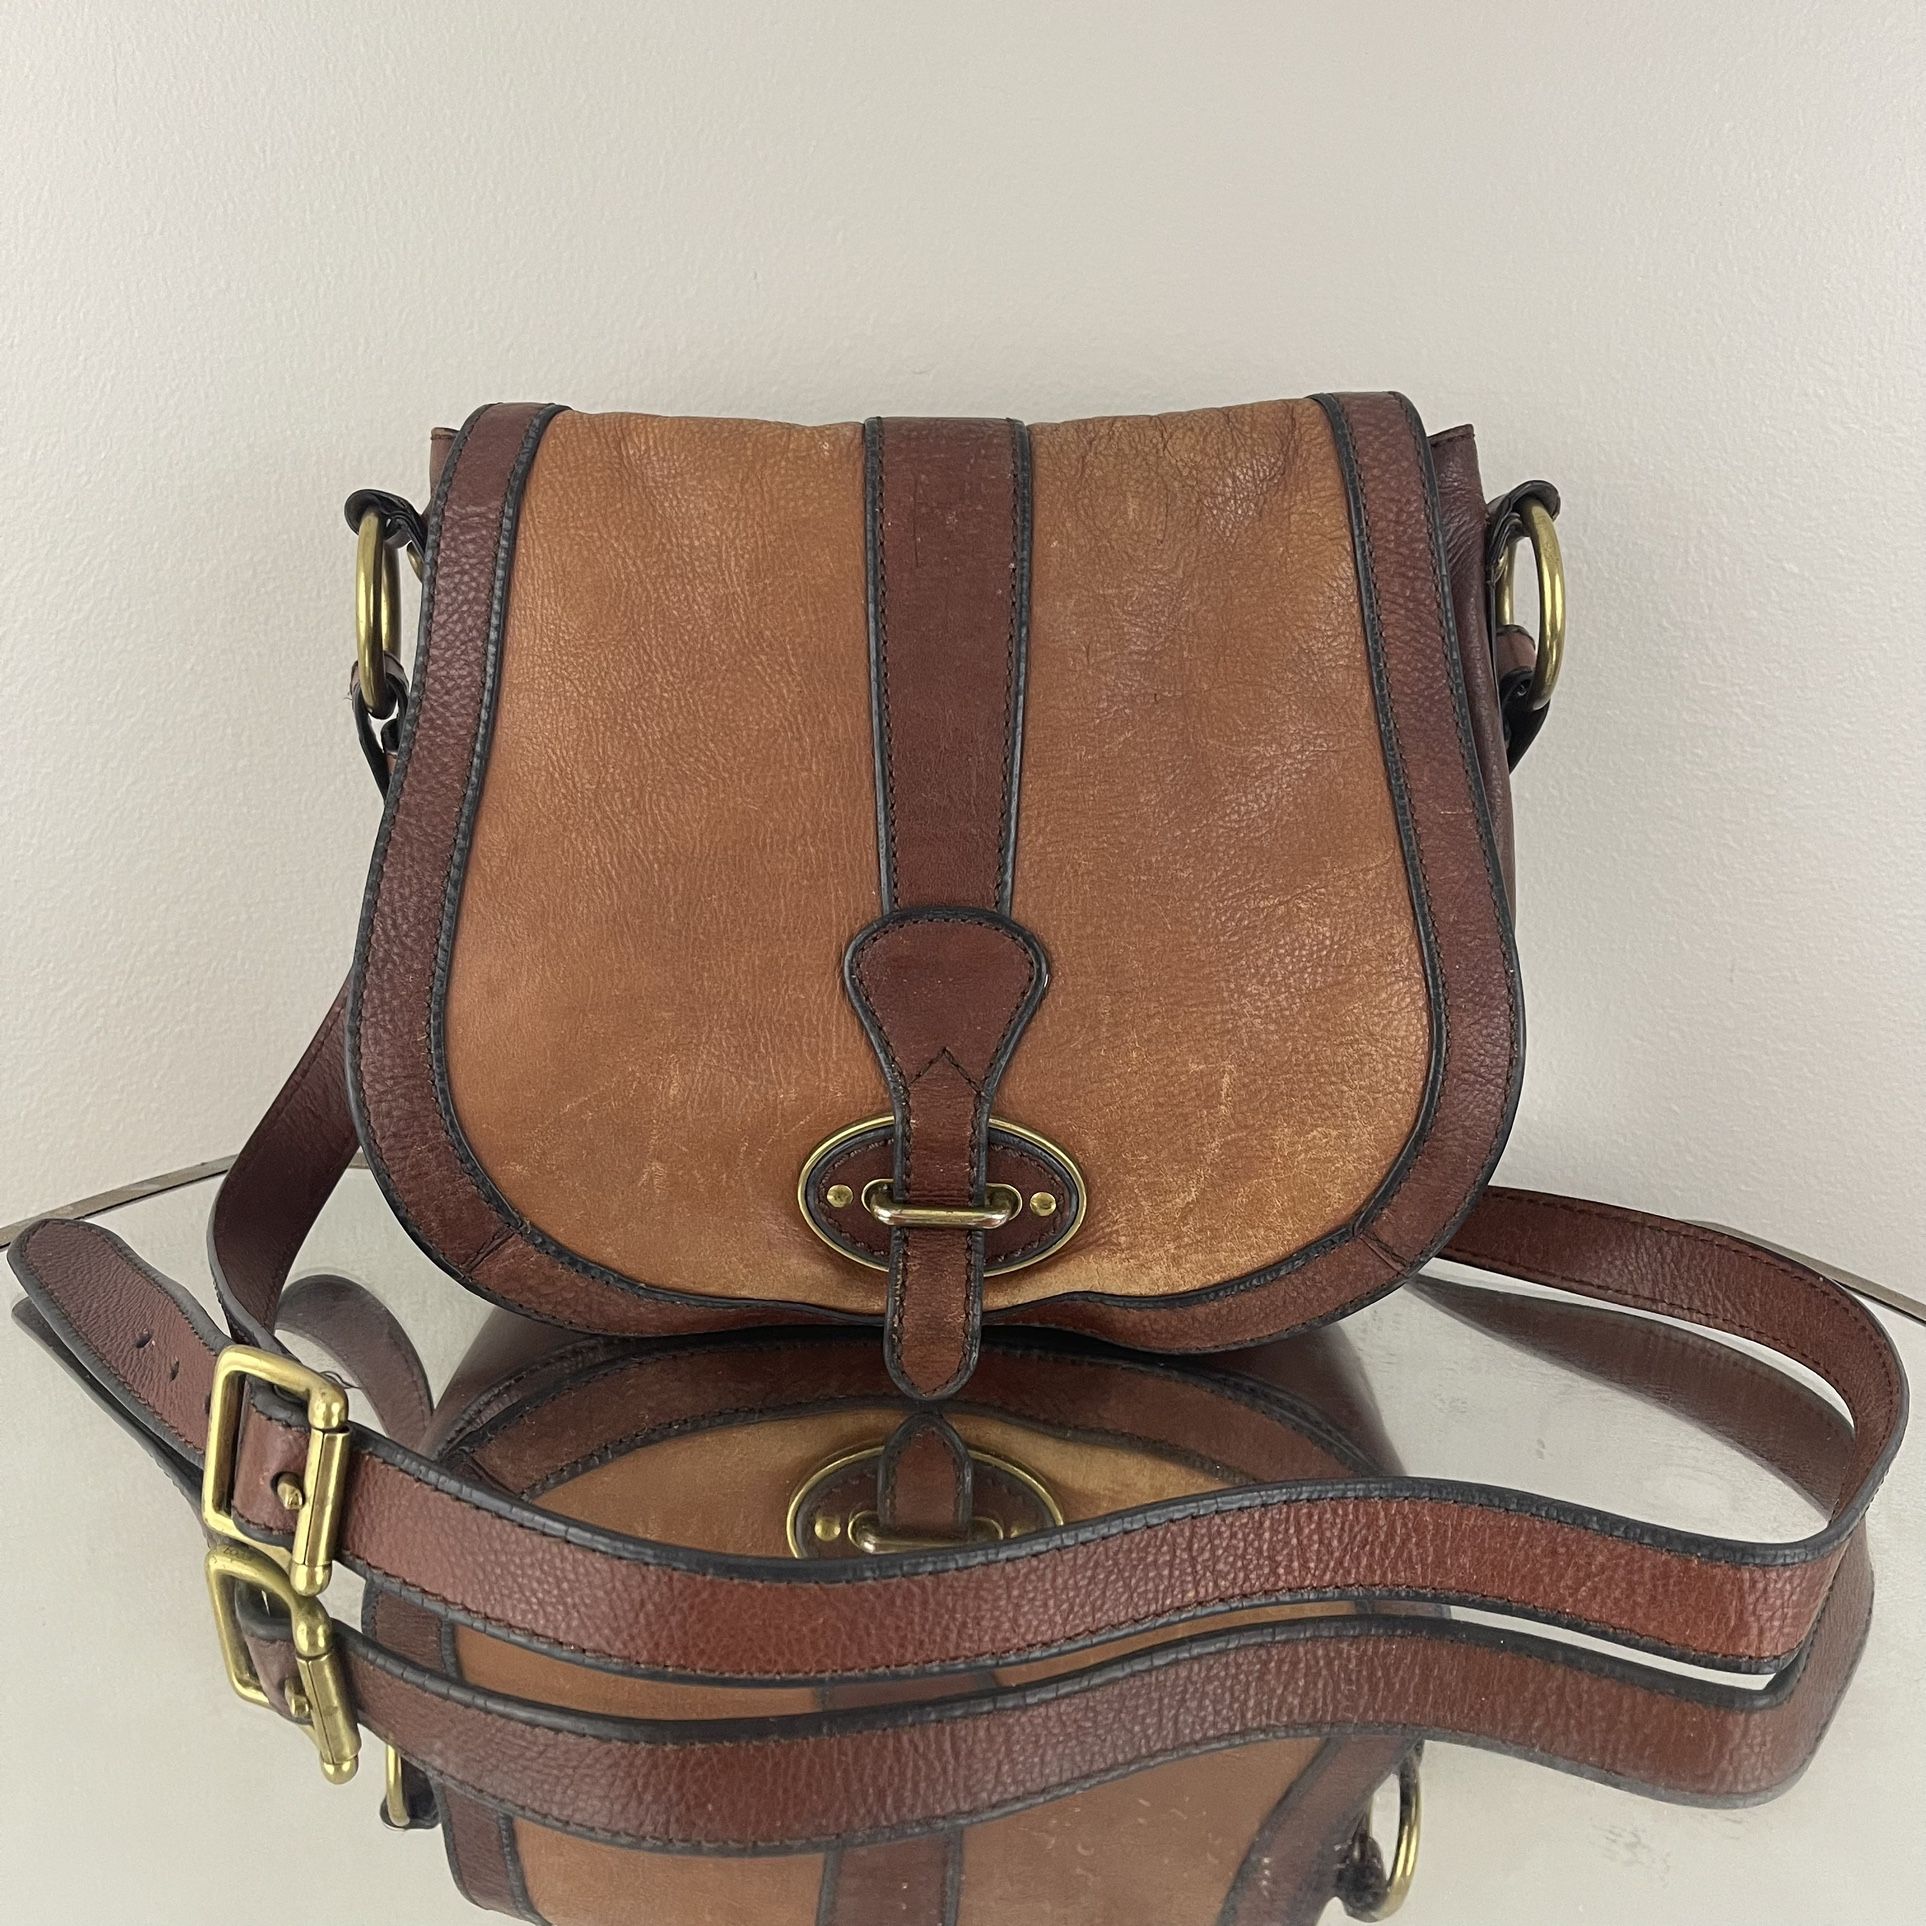 FOSSIL Vintage Reissue Dual Tone Brown Leather Flap Crossbody Messenger Bag